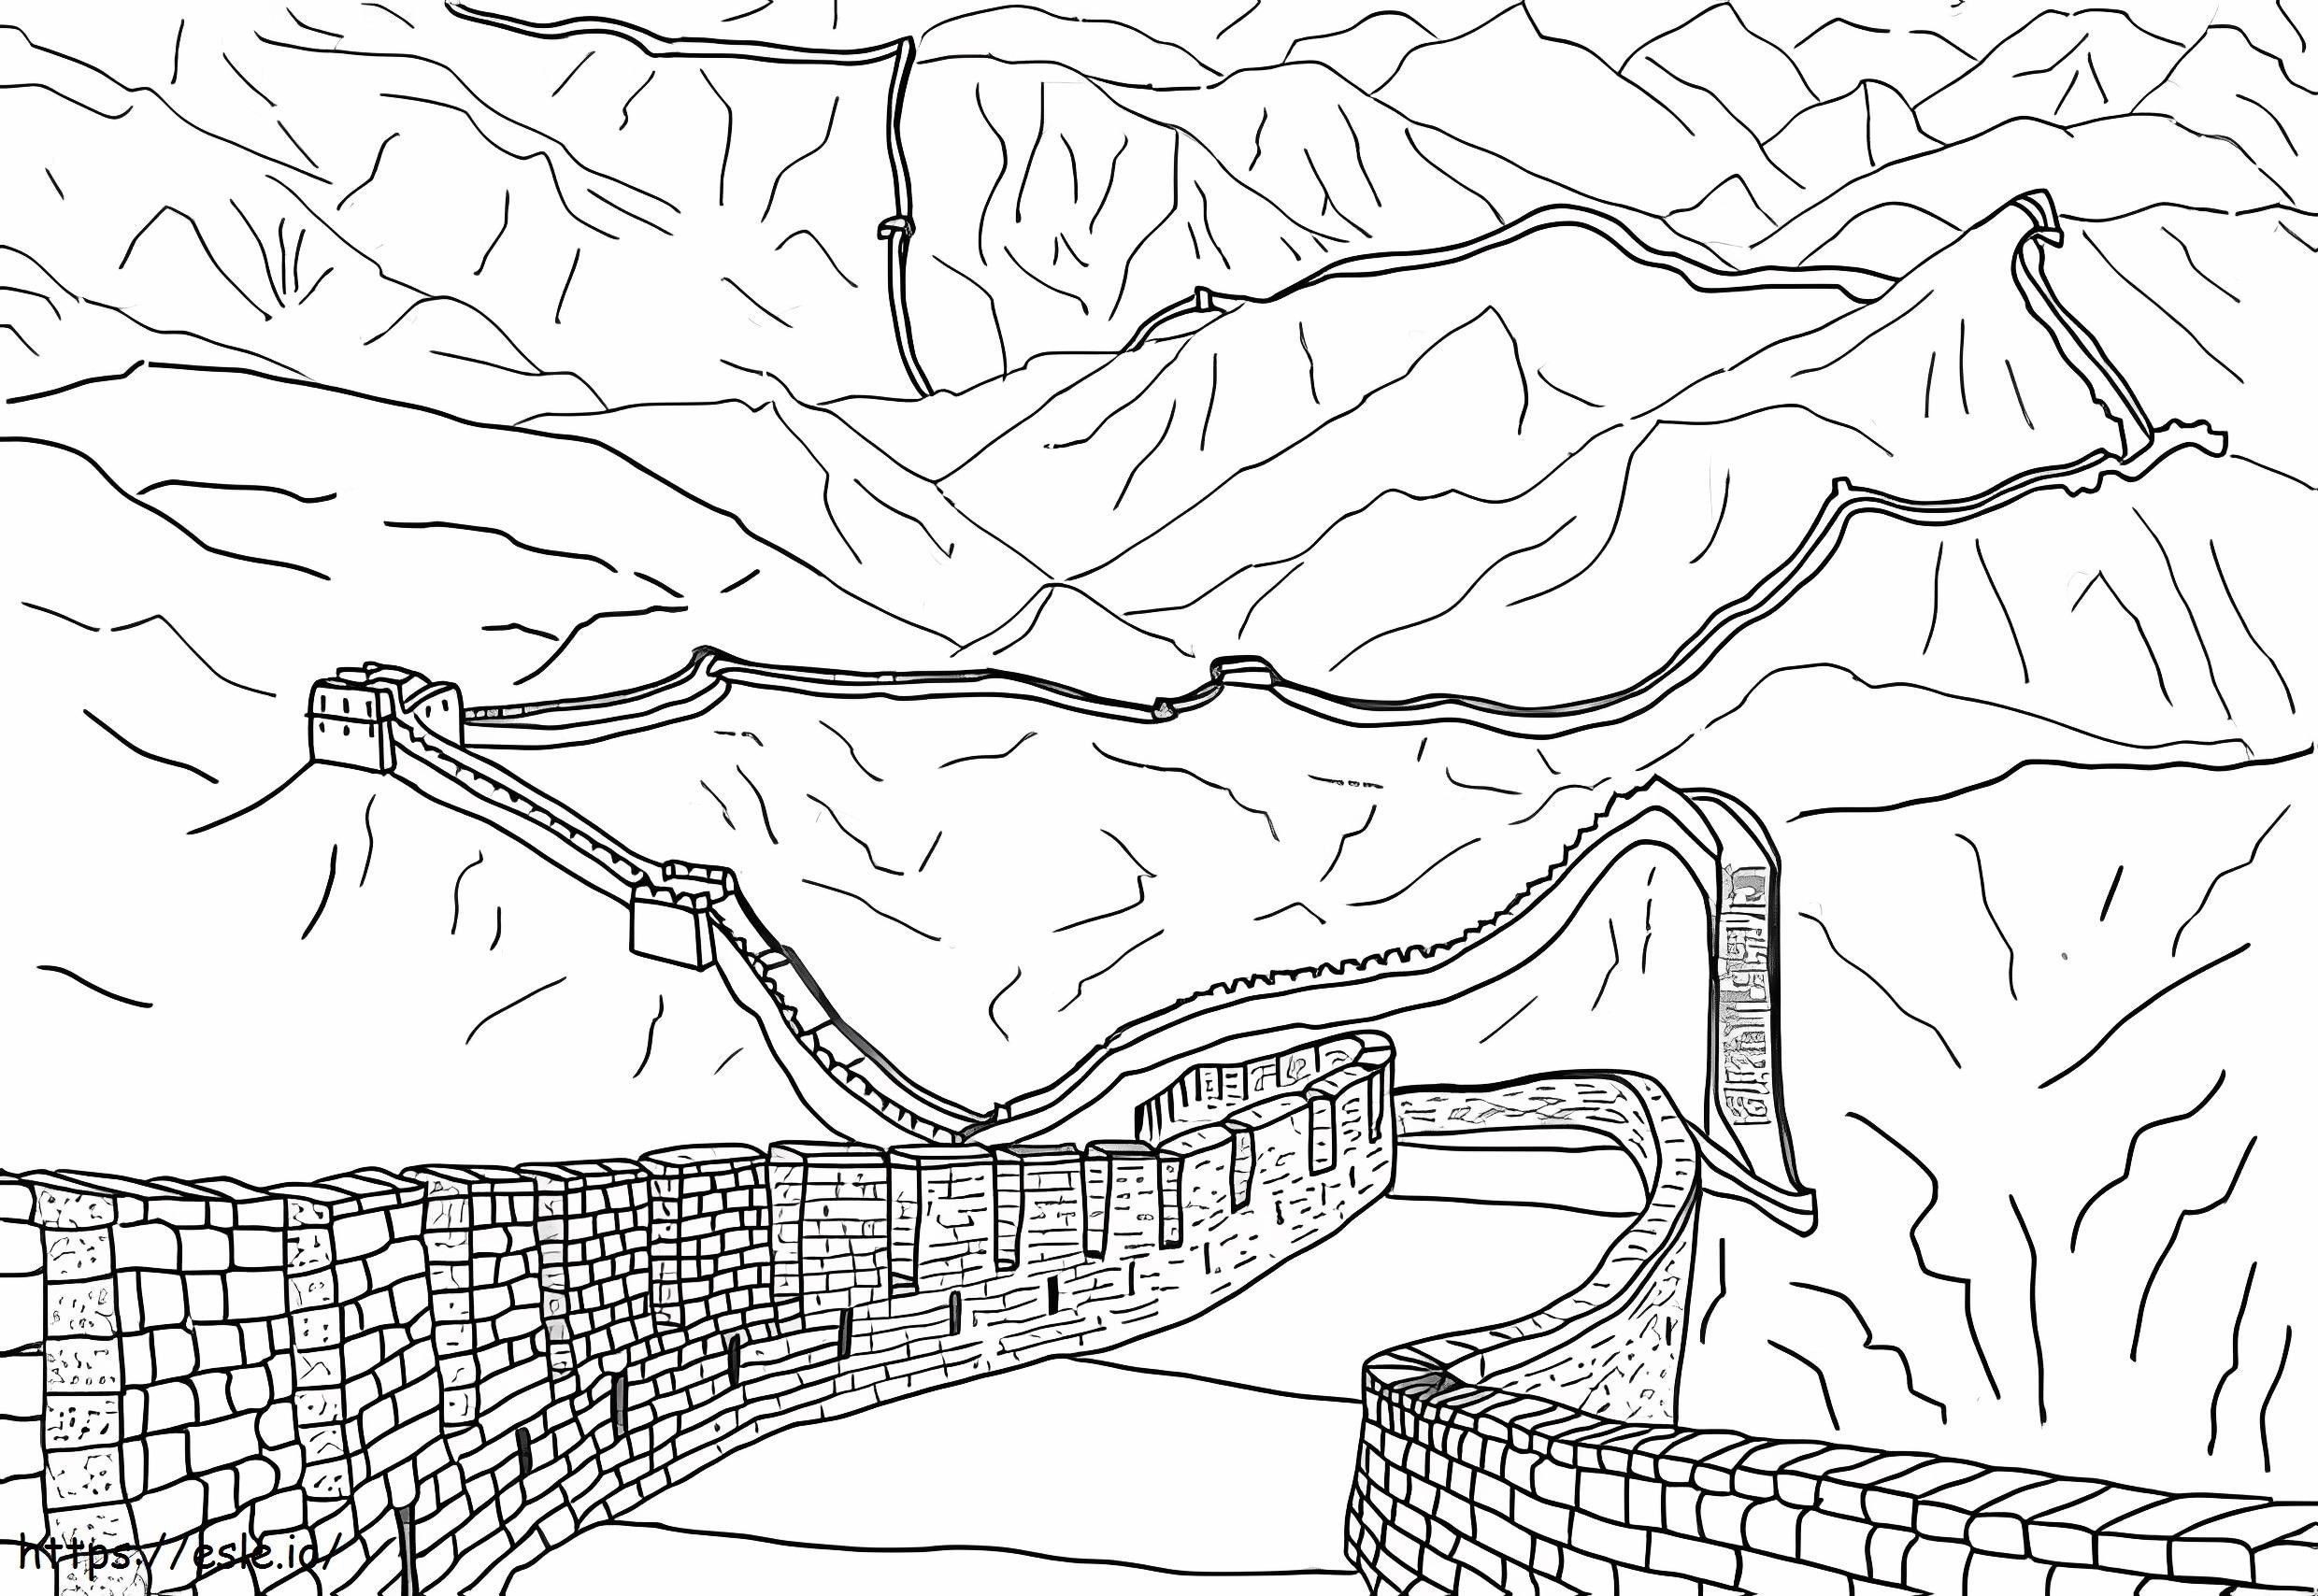 Impressive Great Wall coloring page